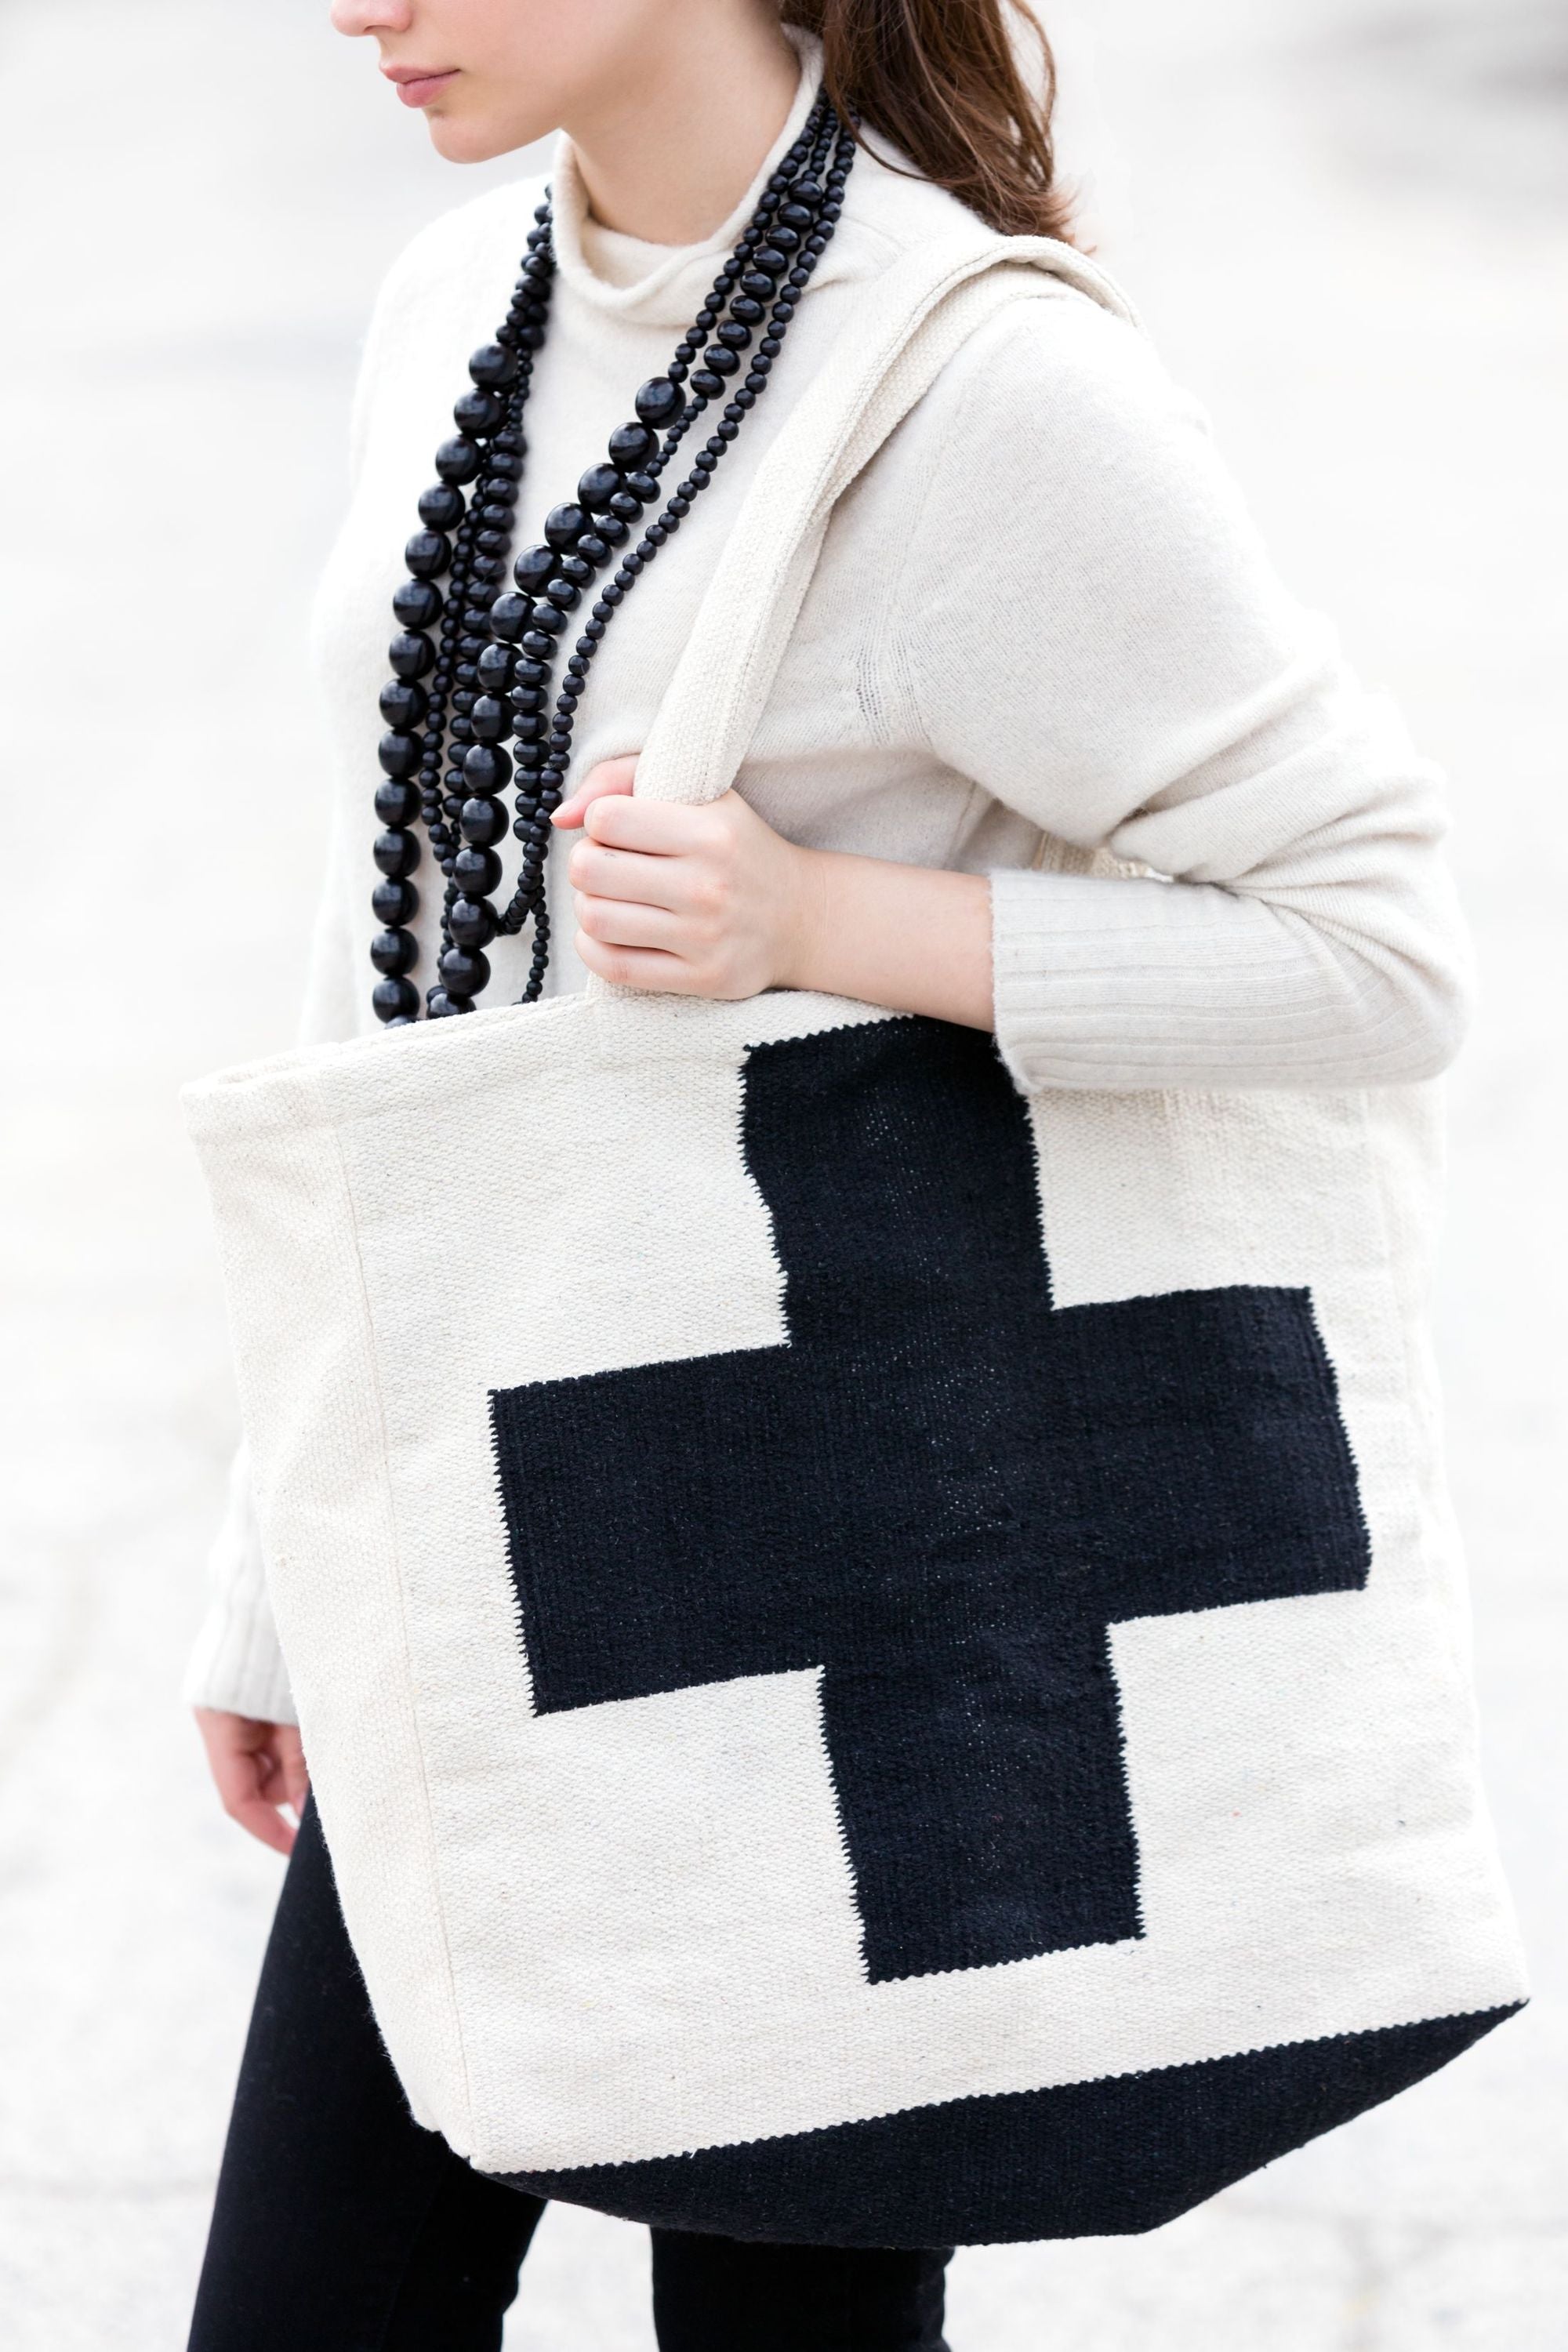 Black and White Cross Dhurrie Tote Bag